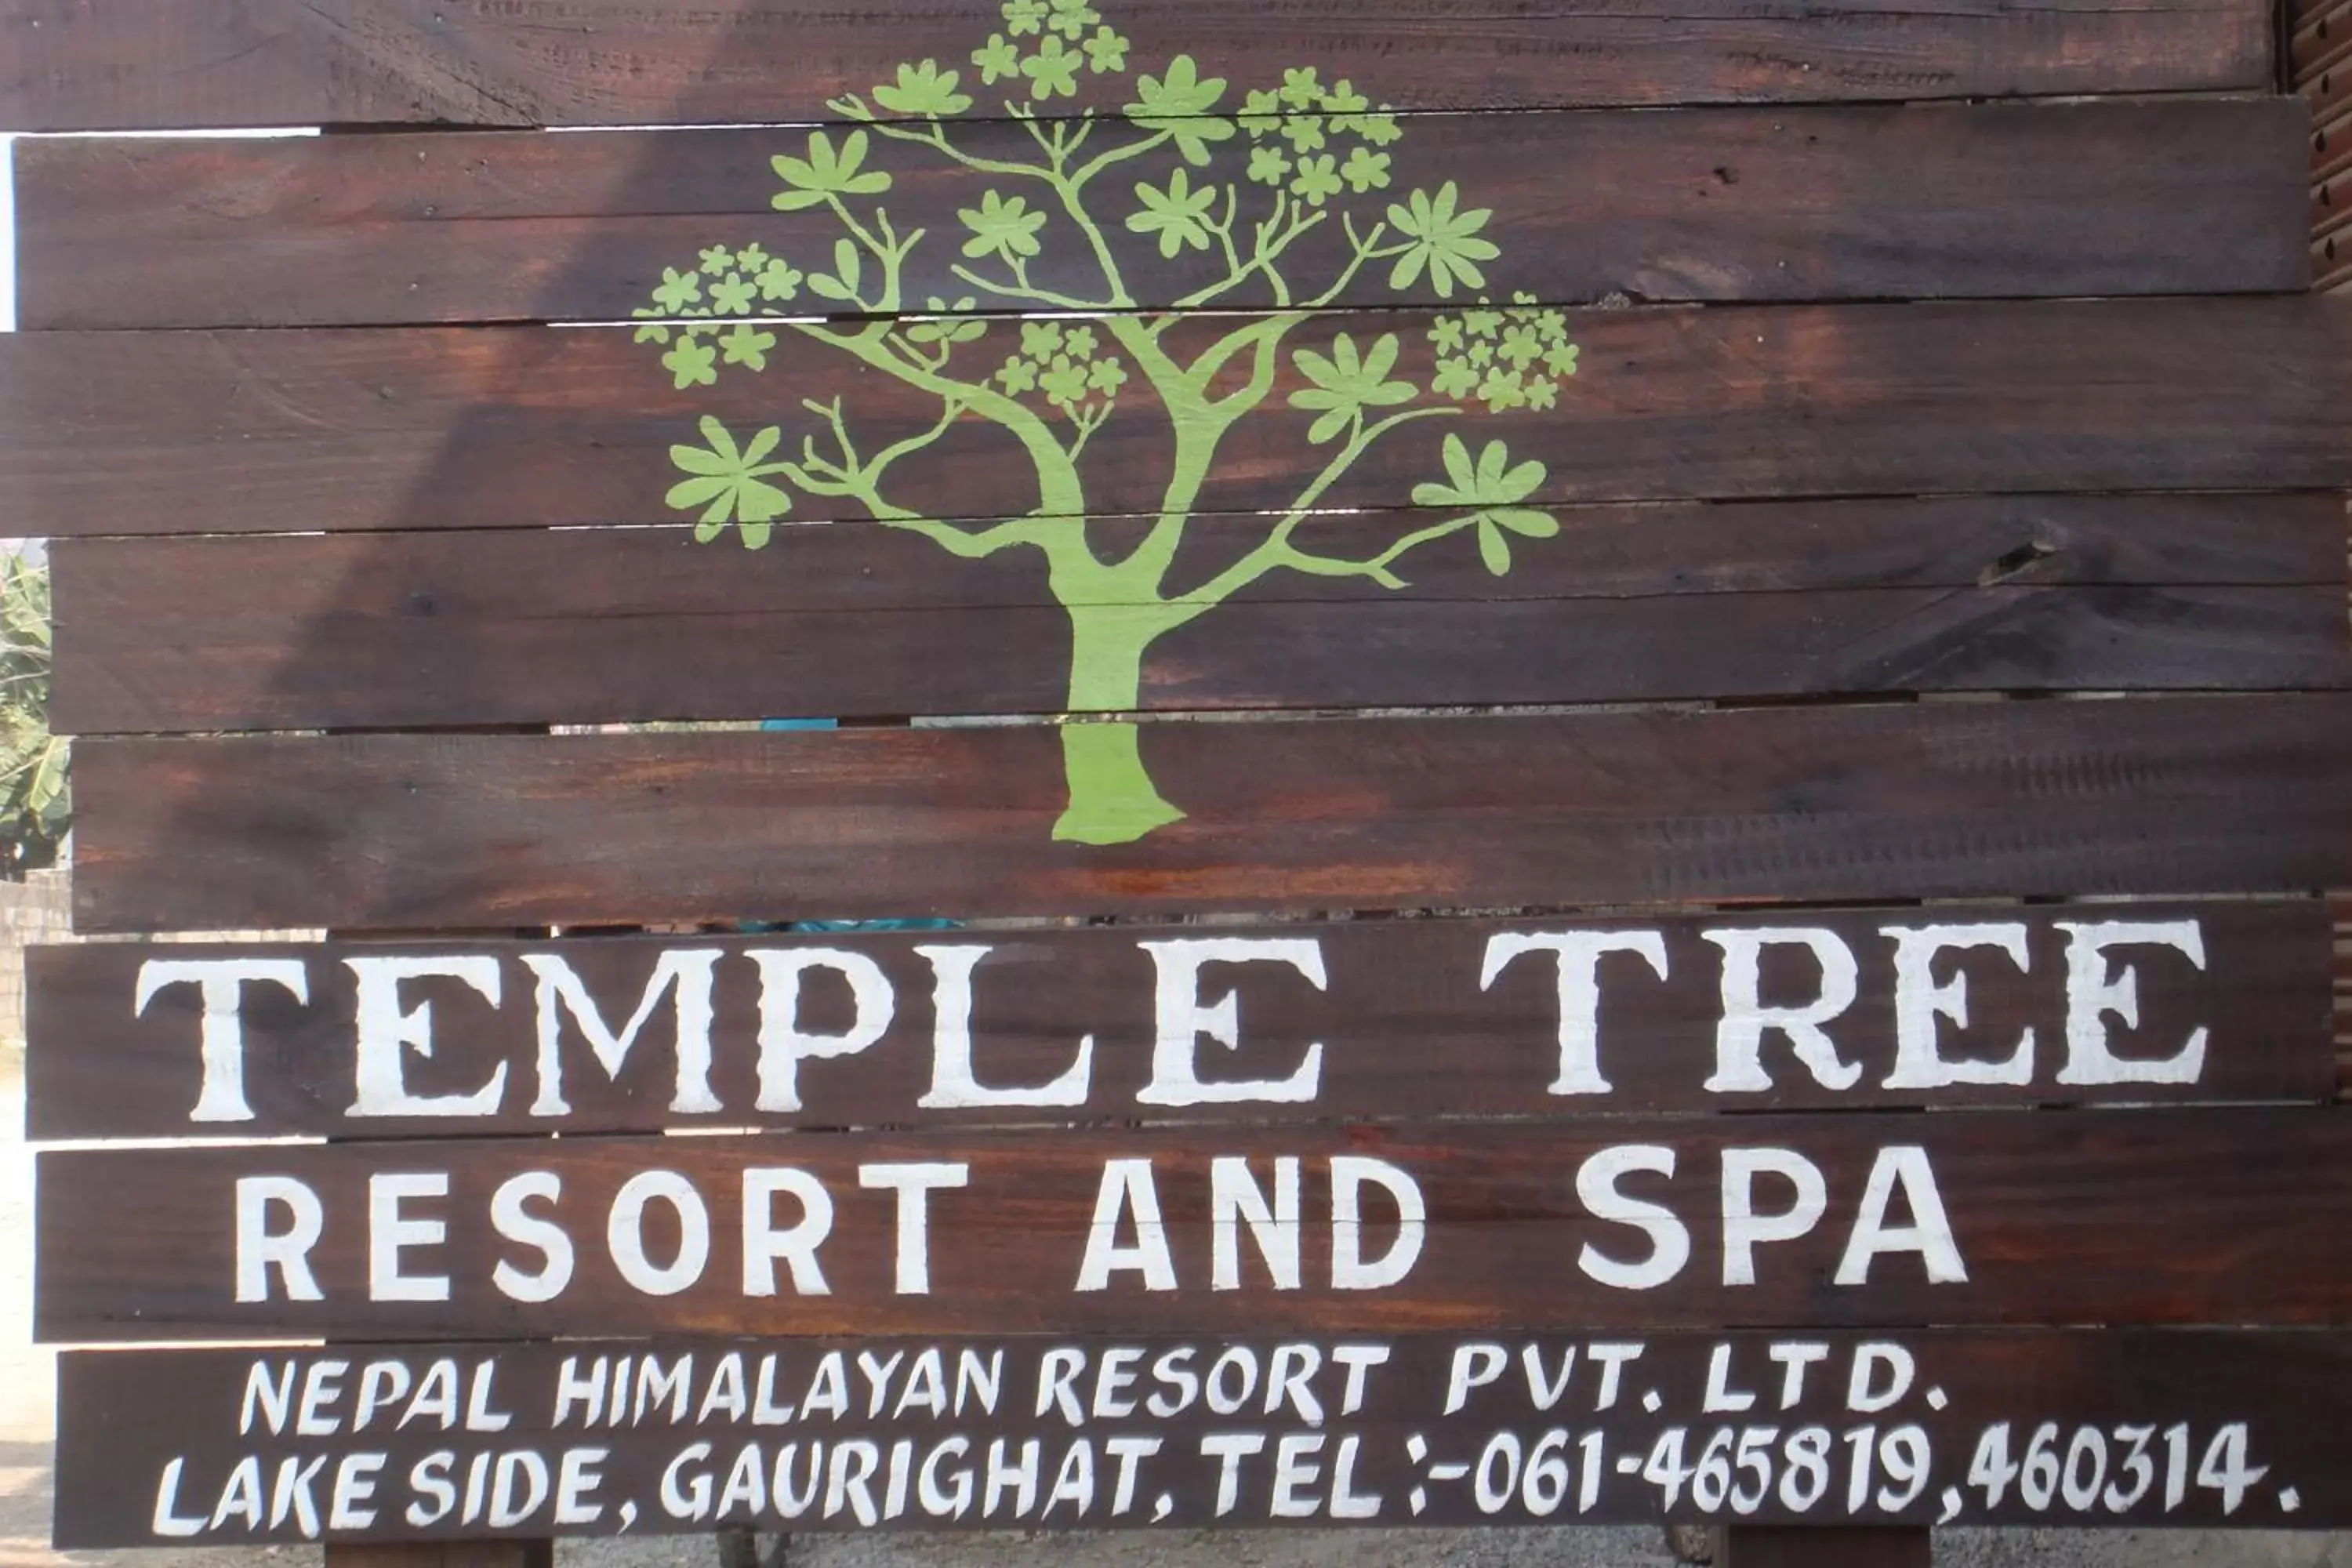 Property logo or sign, Property Logo/Sign in Temple Tree Resort & Spa